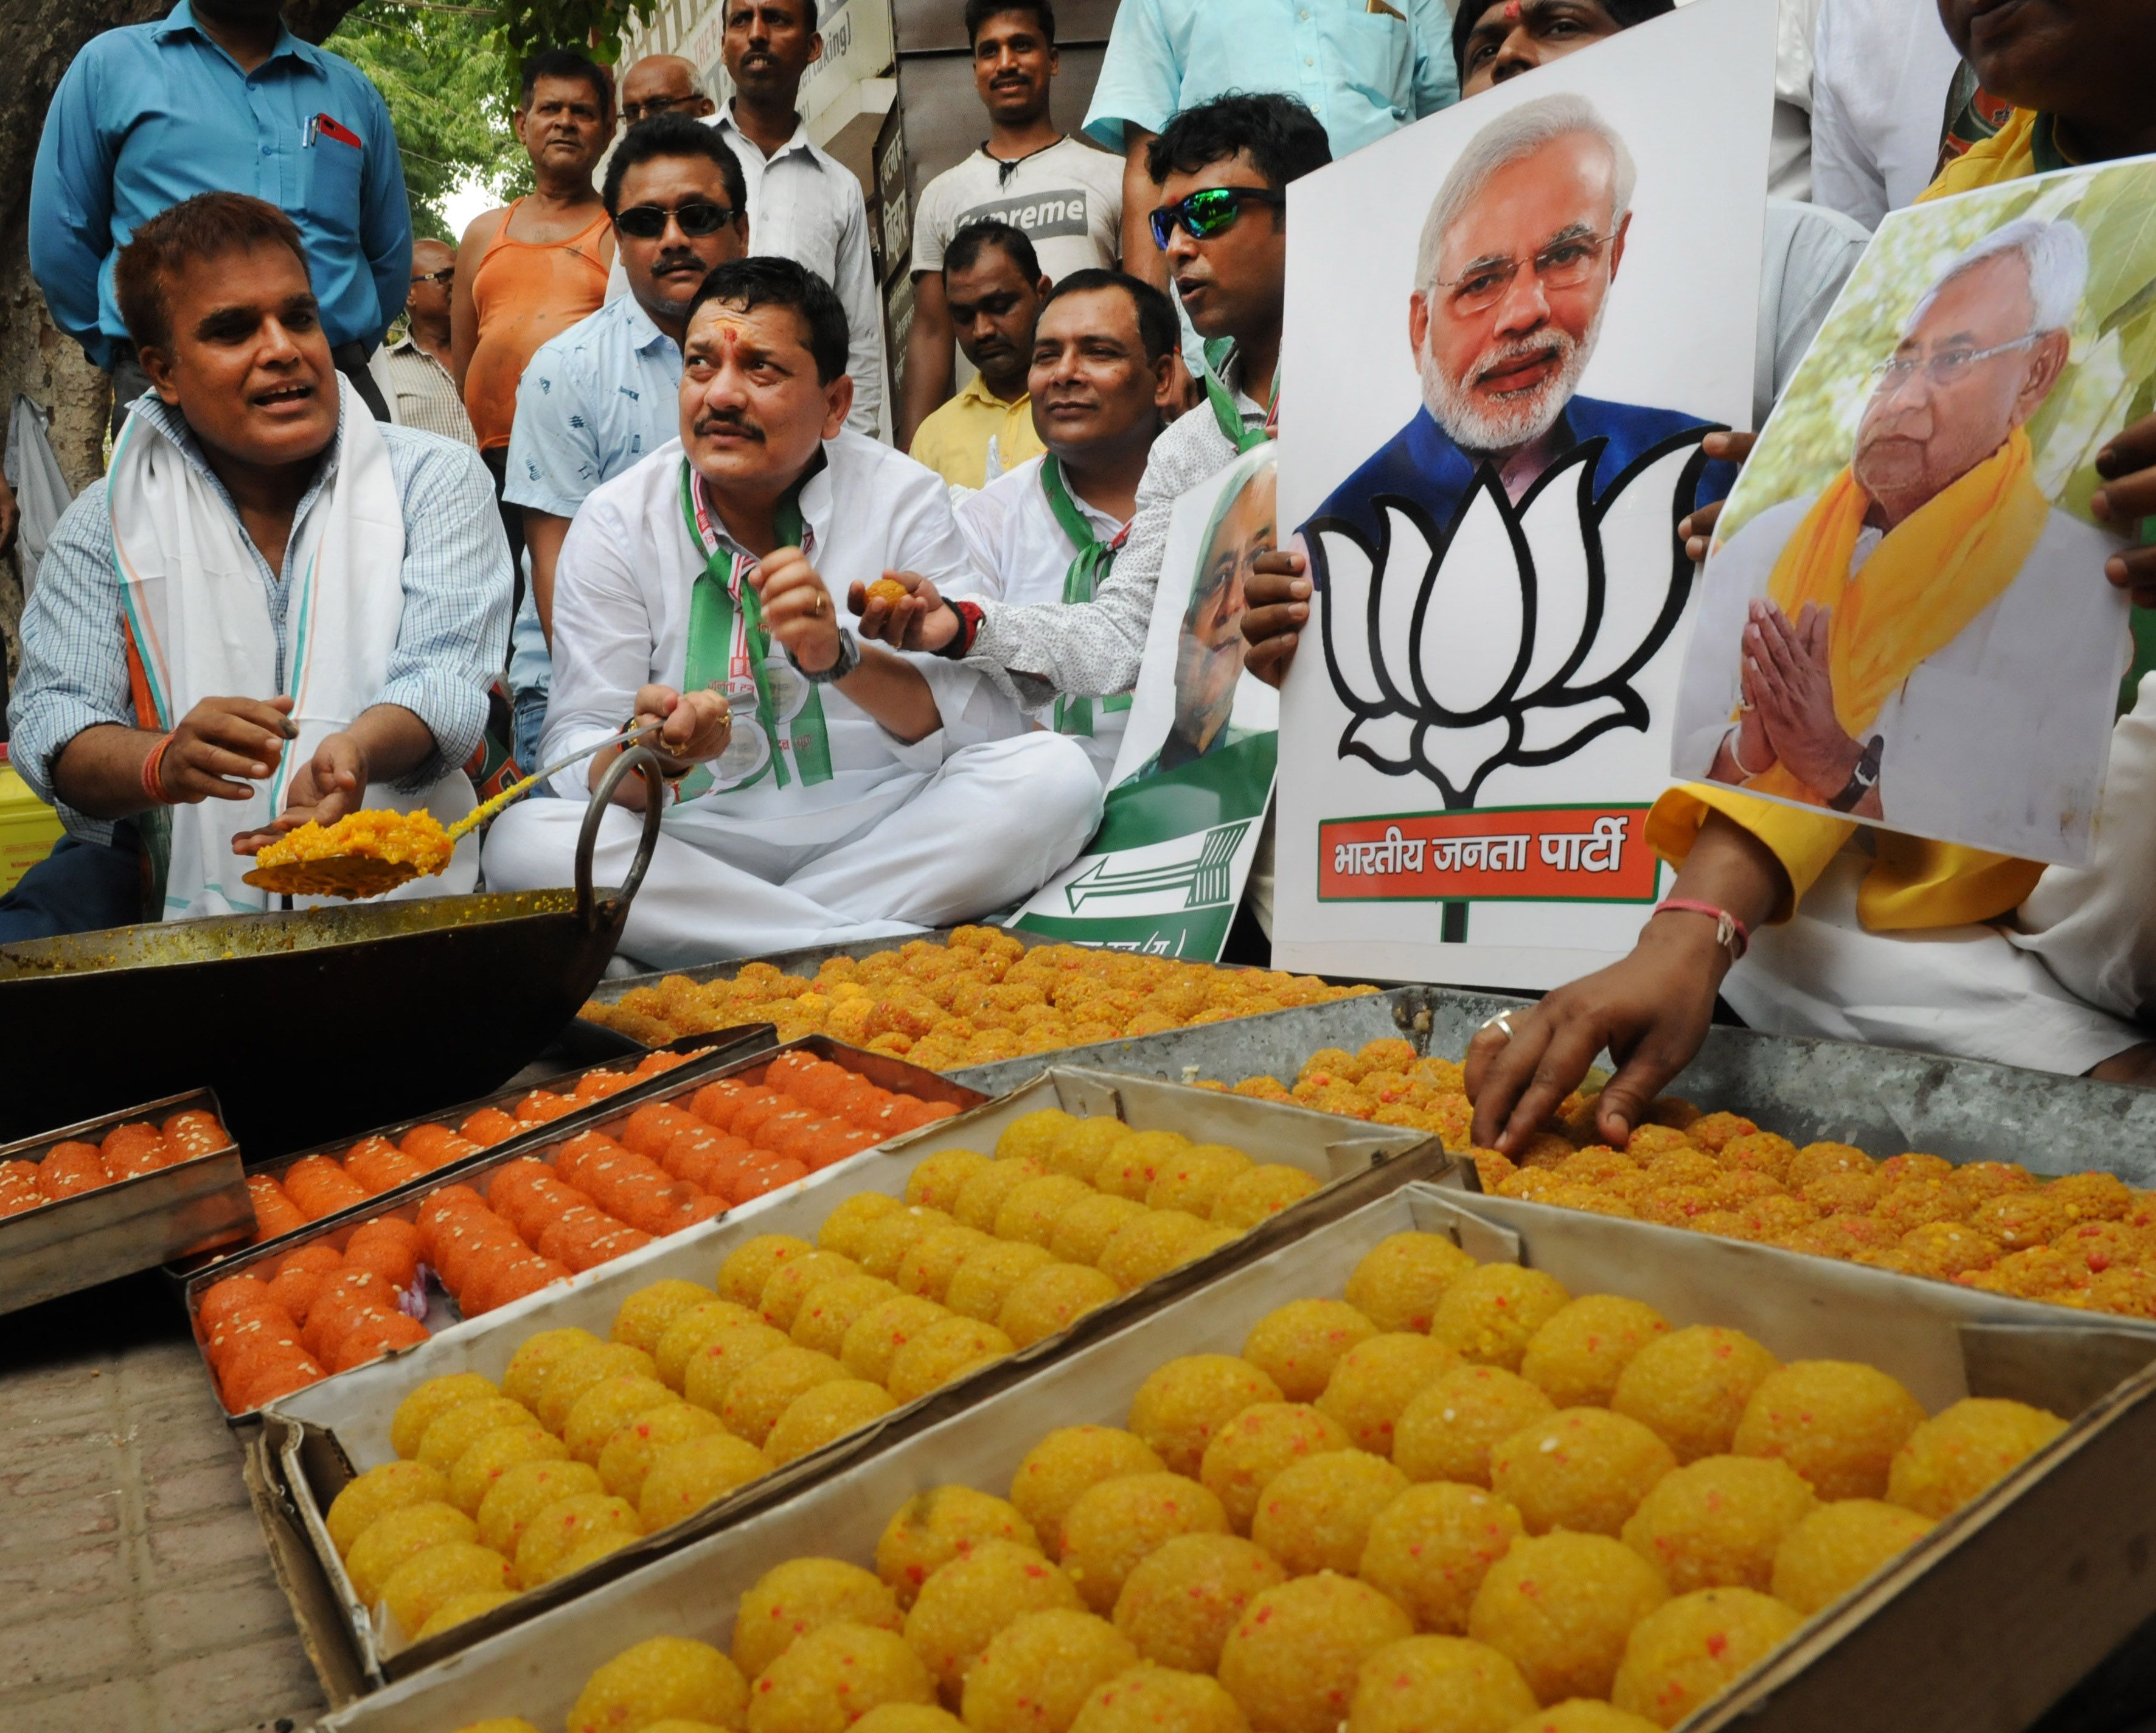 Sweet shops are busy preparing laddus on orders from candidates across political parties, each banking on a win, at Pataliputra on May 22, 2019 in Patna, India. 